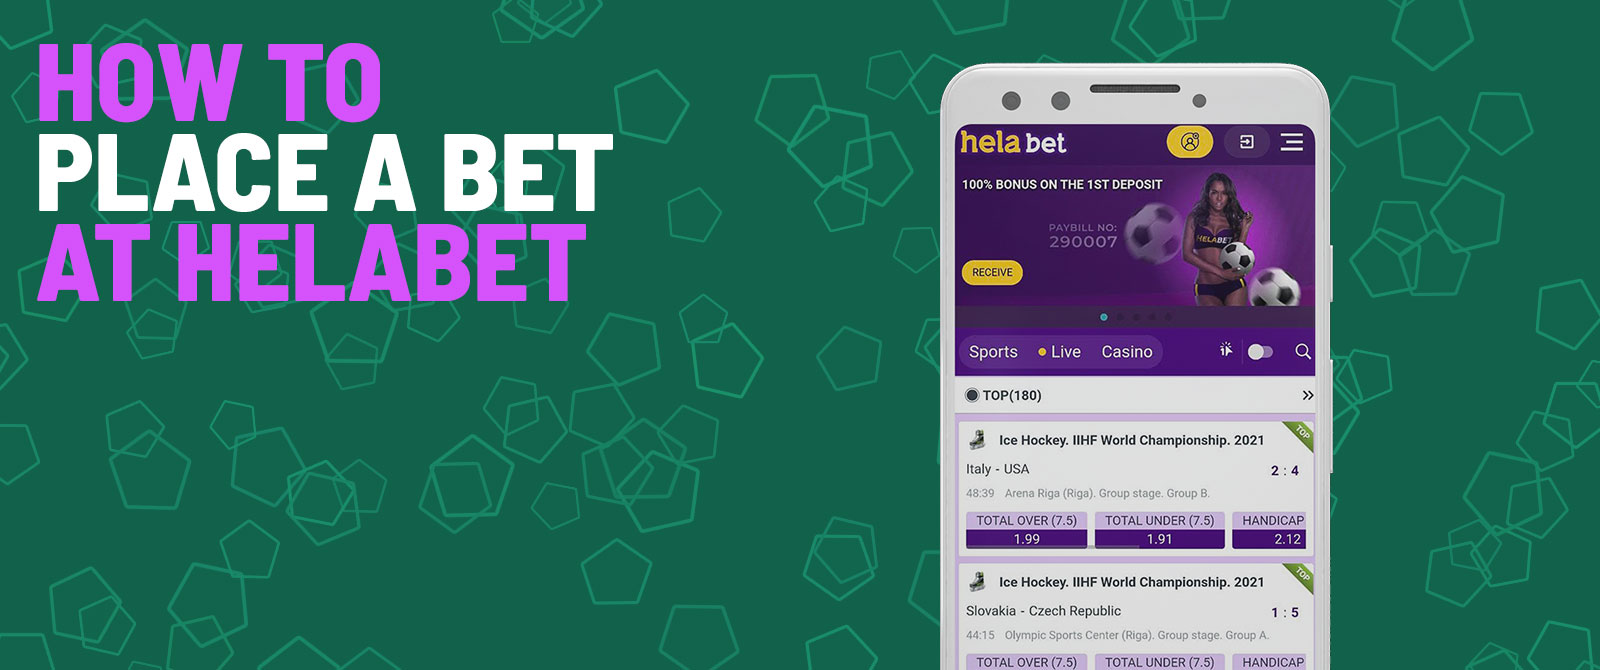 how to place a bet at helabet